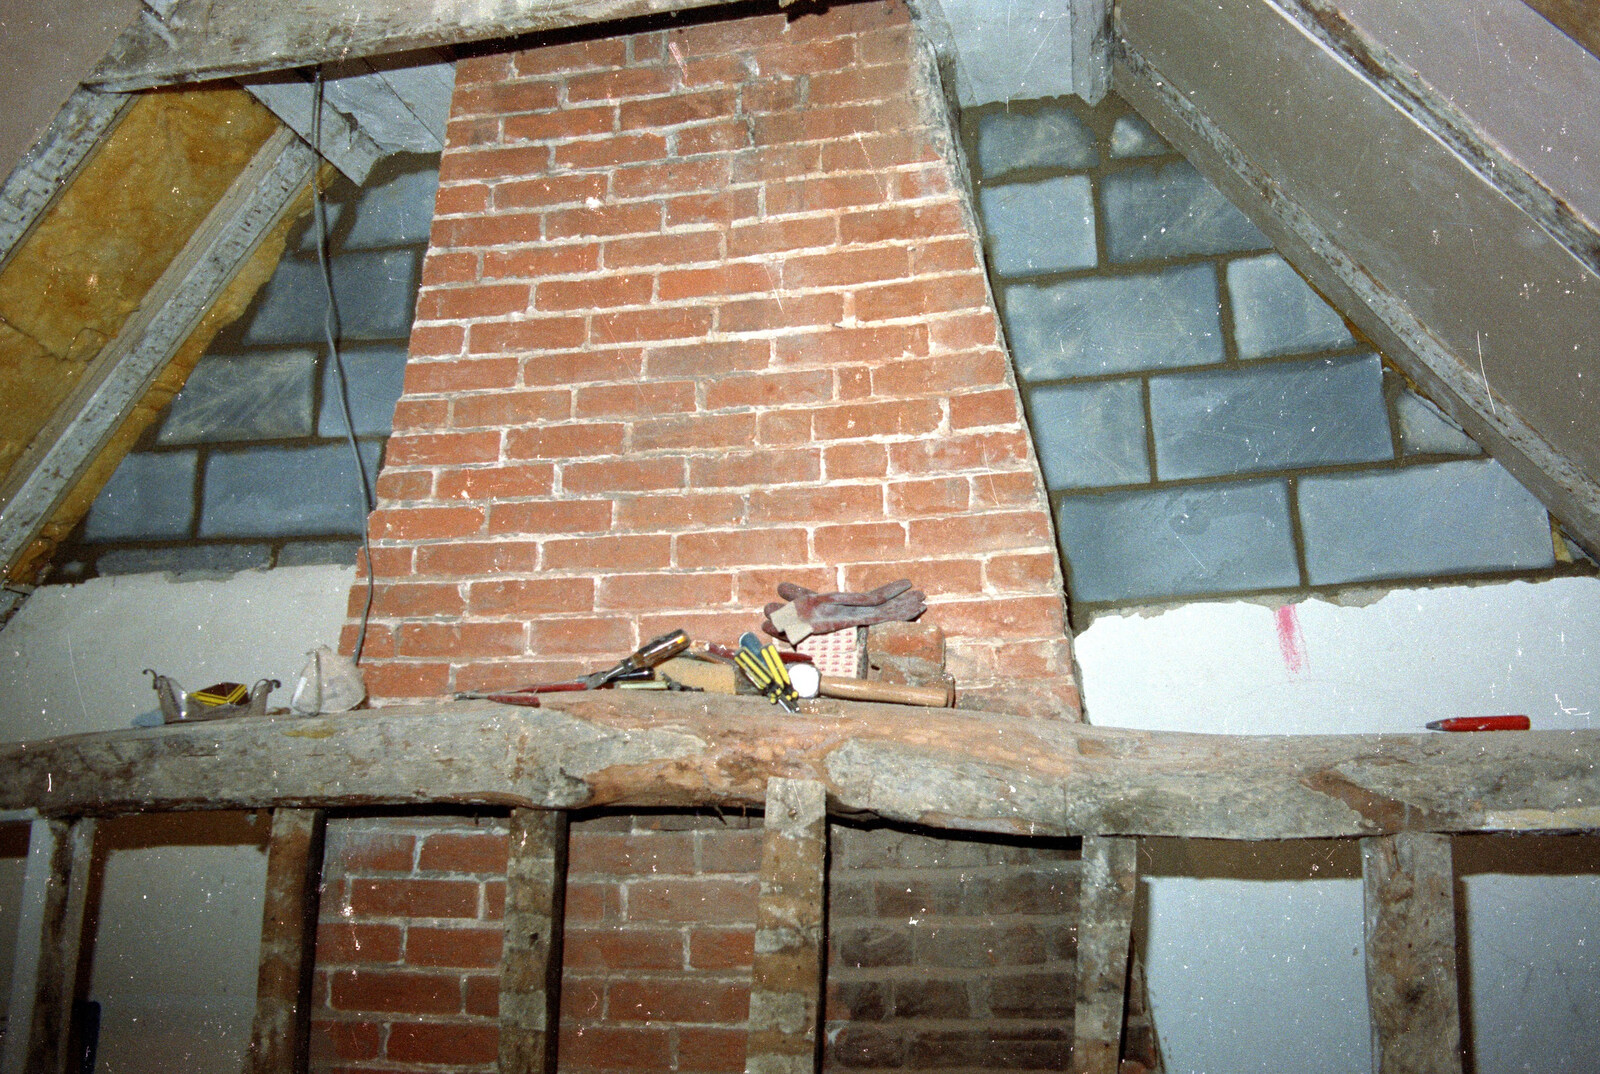 The chimney breast from Bedroom Demolition, Brome, Suffolk - 10th October 1994